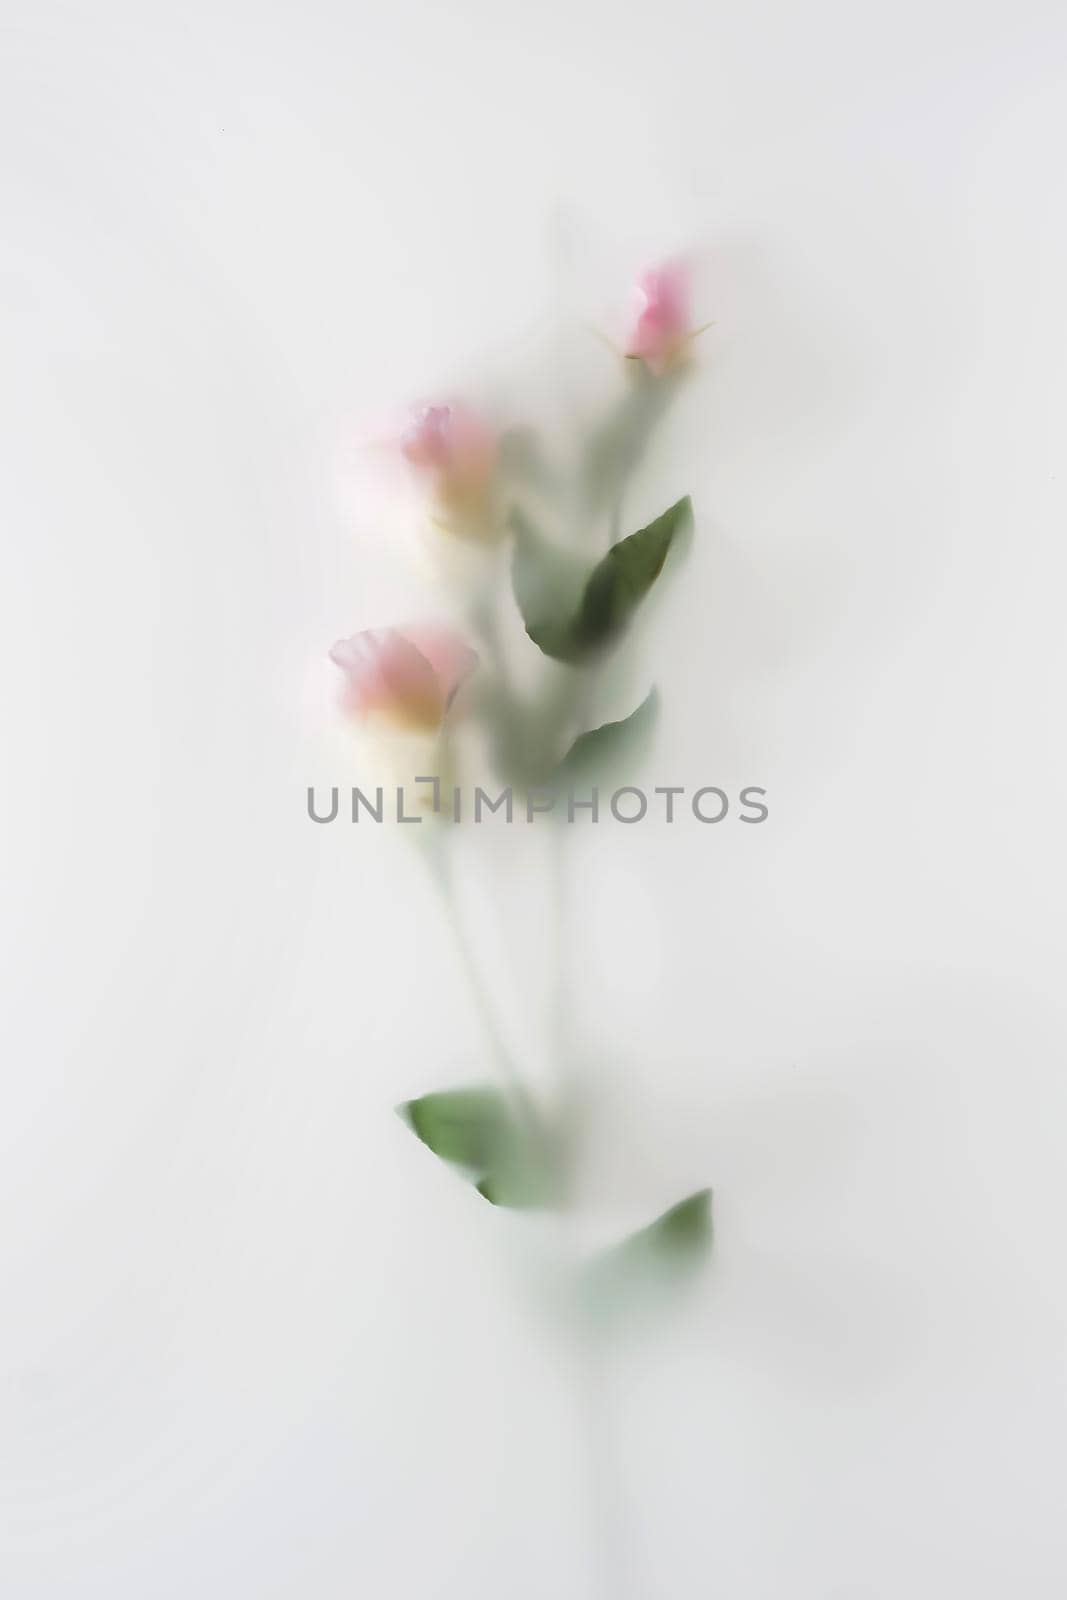 Defocused mist flower with leaves in mist has pastel colors magical mystical effect.